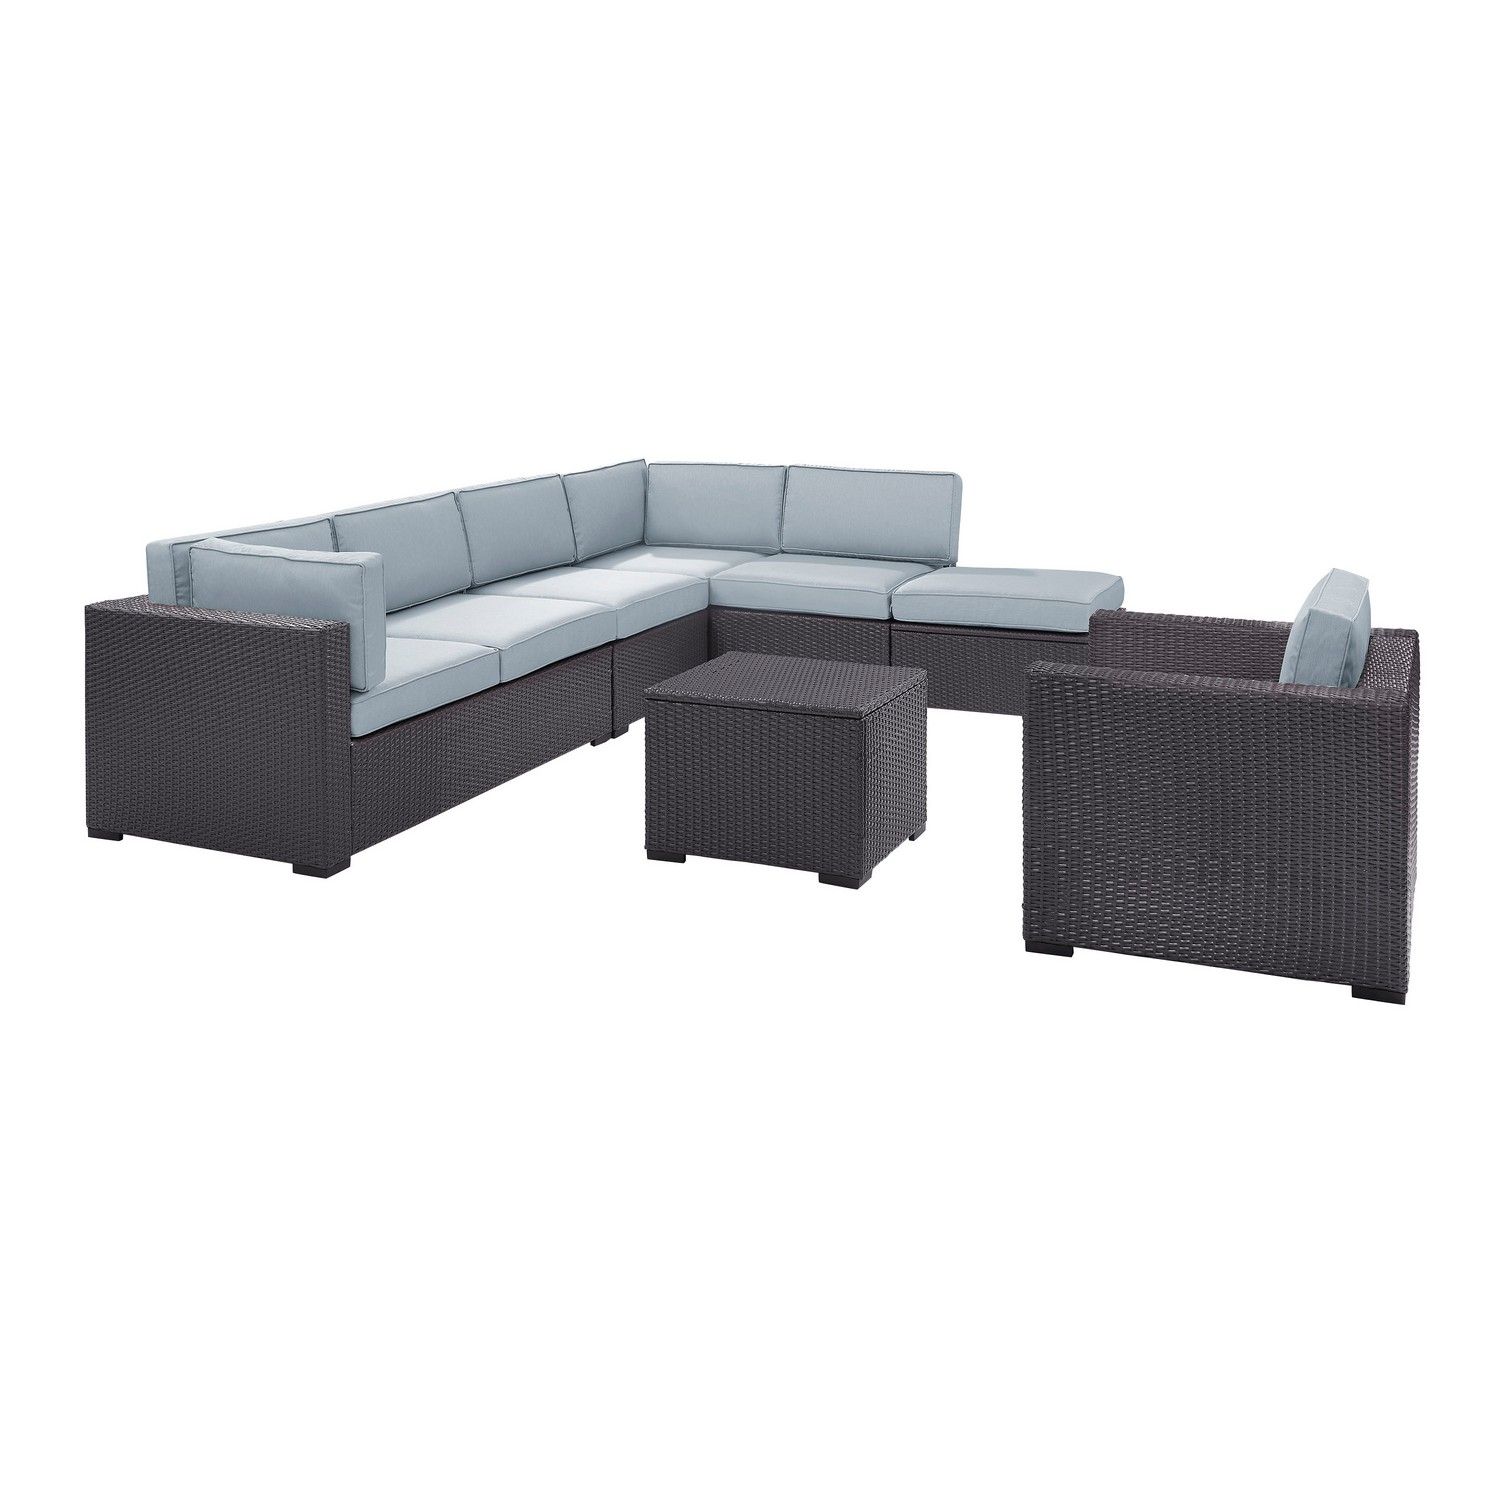 Crosley Biscayne 6-PC Outdoor Wicker Sectional Set - 2 Loveseats, Armless Chair, Arm Chair, Coffee Table, Ottoman - Mist/Brown